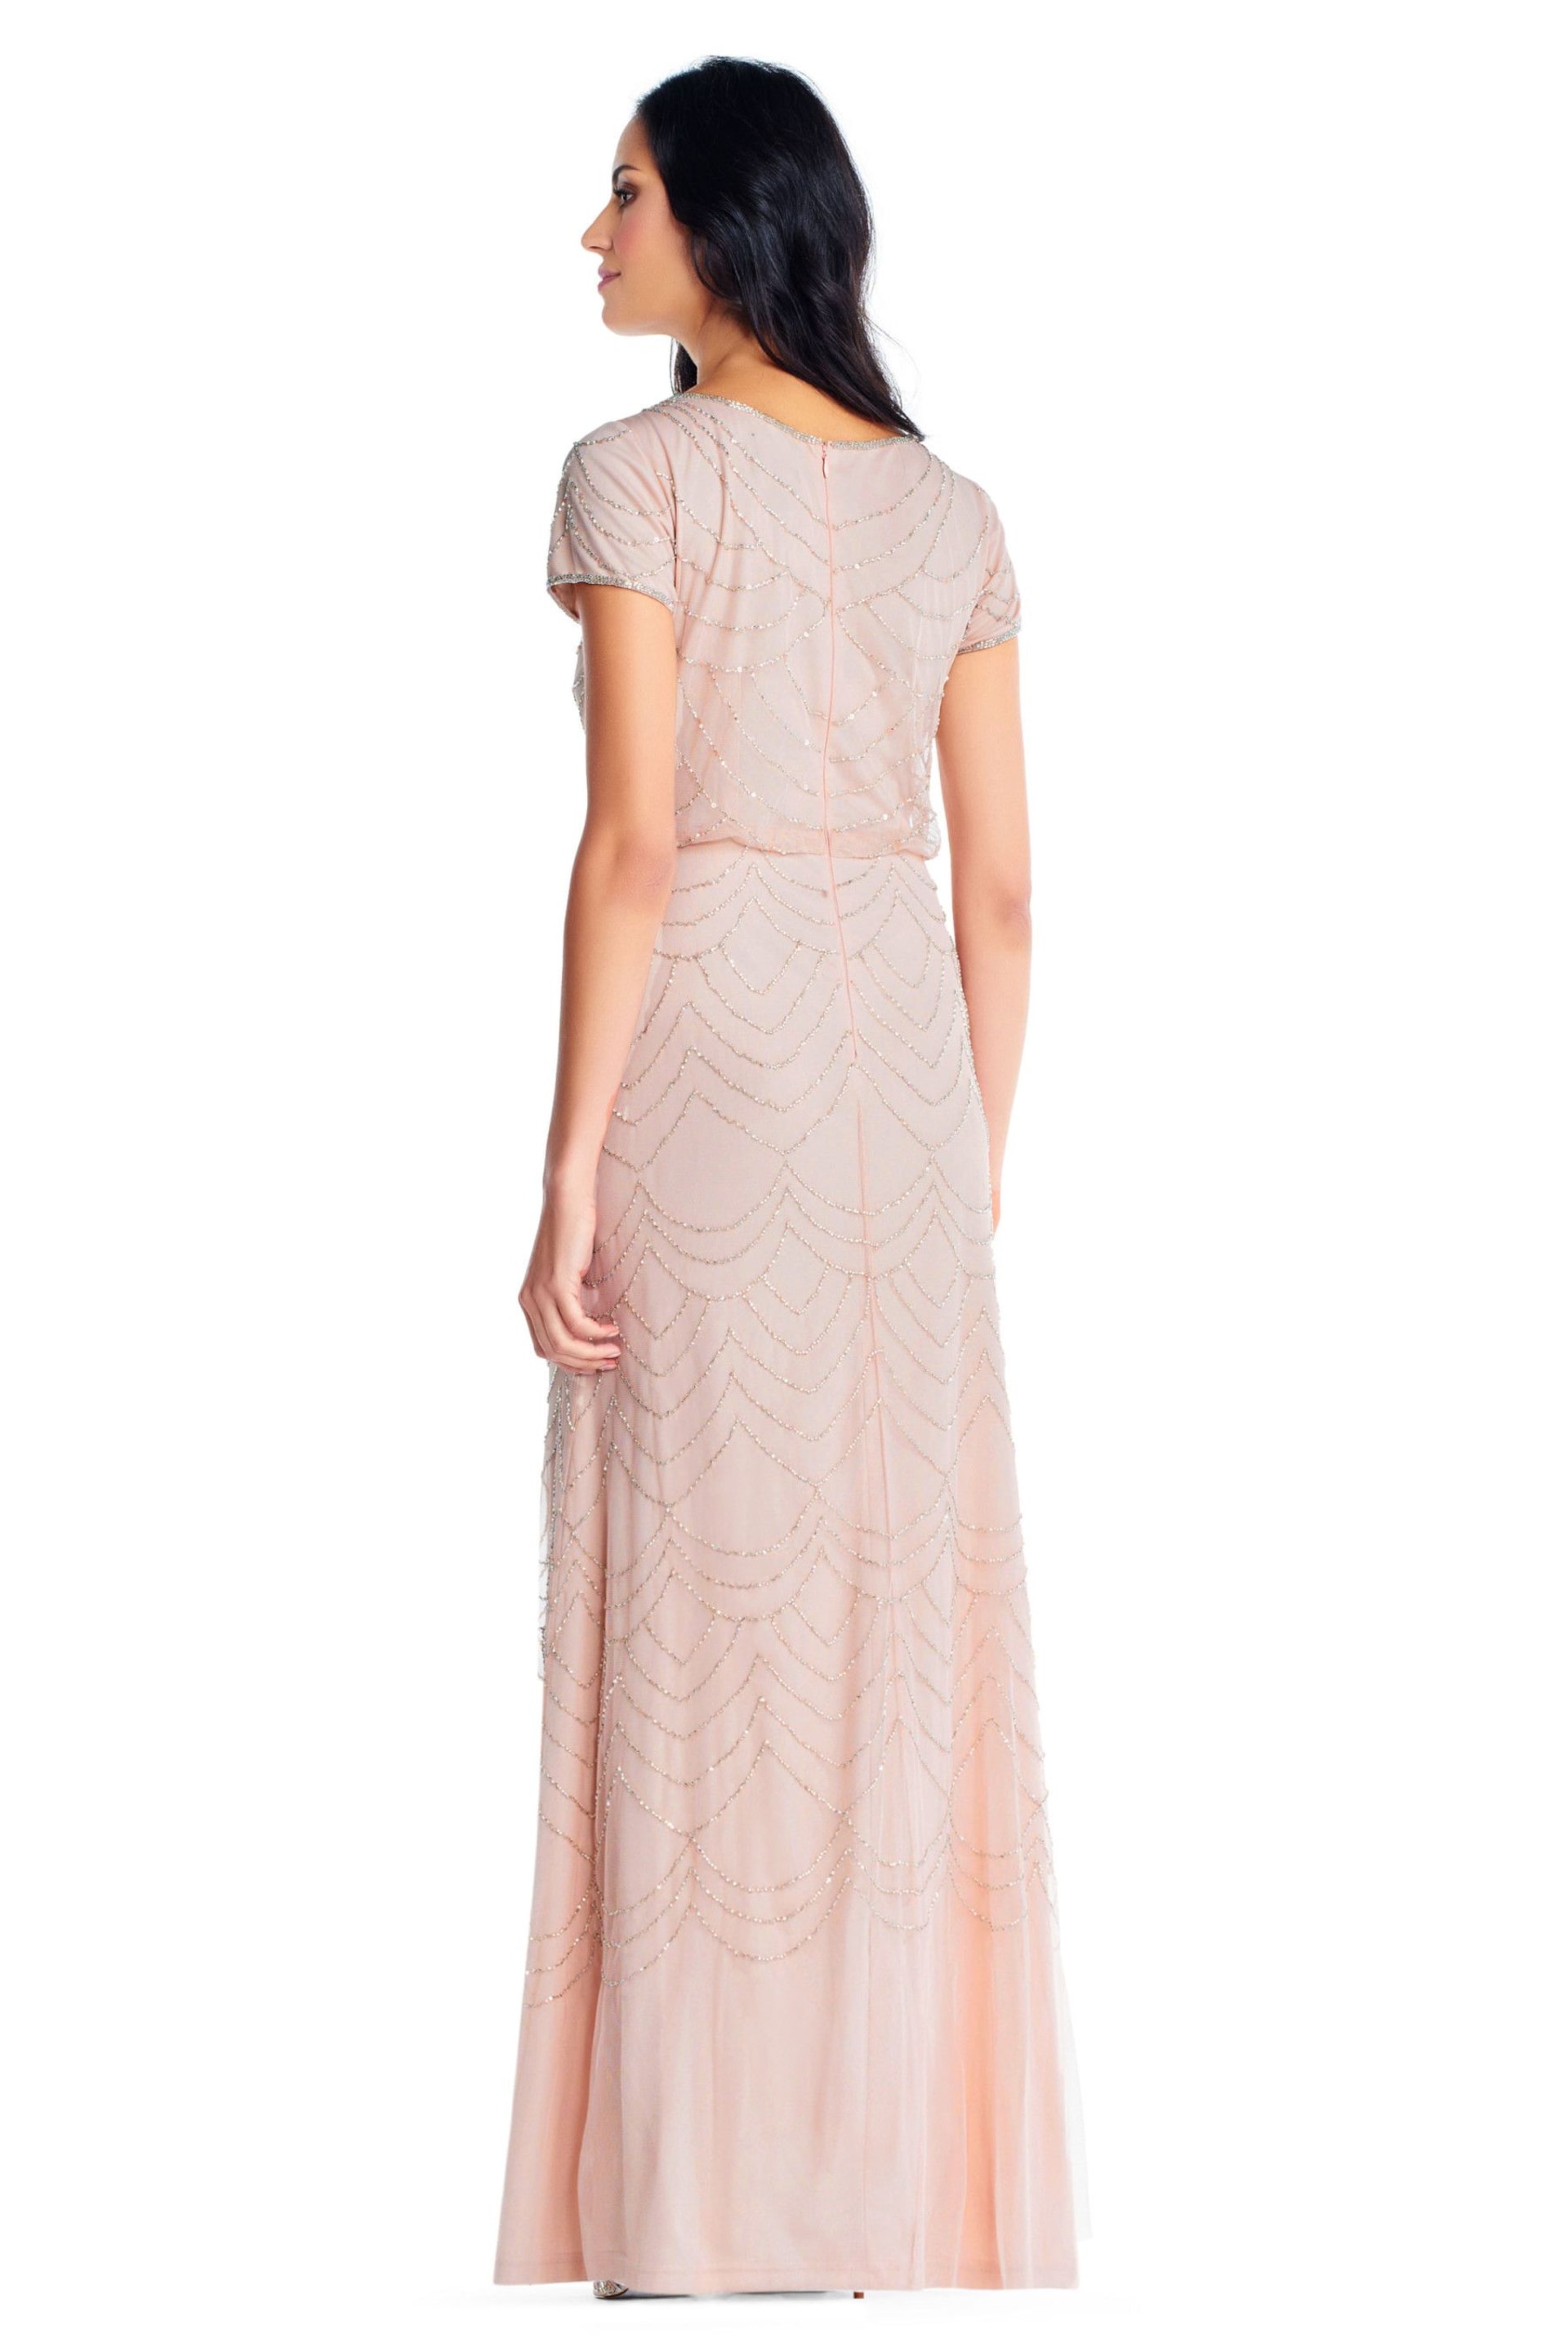 Adrianna Papell Blouson Beaded Pink Dress - Image 2 of 2